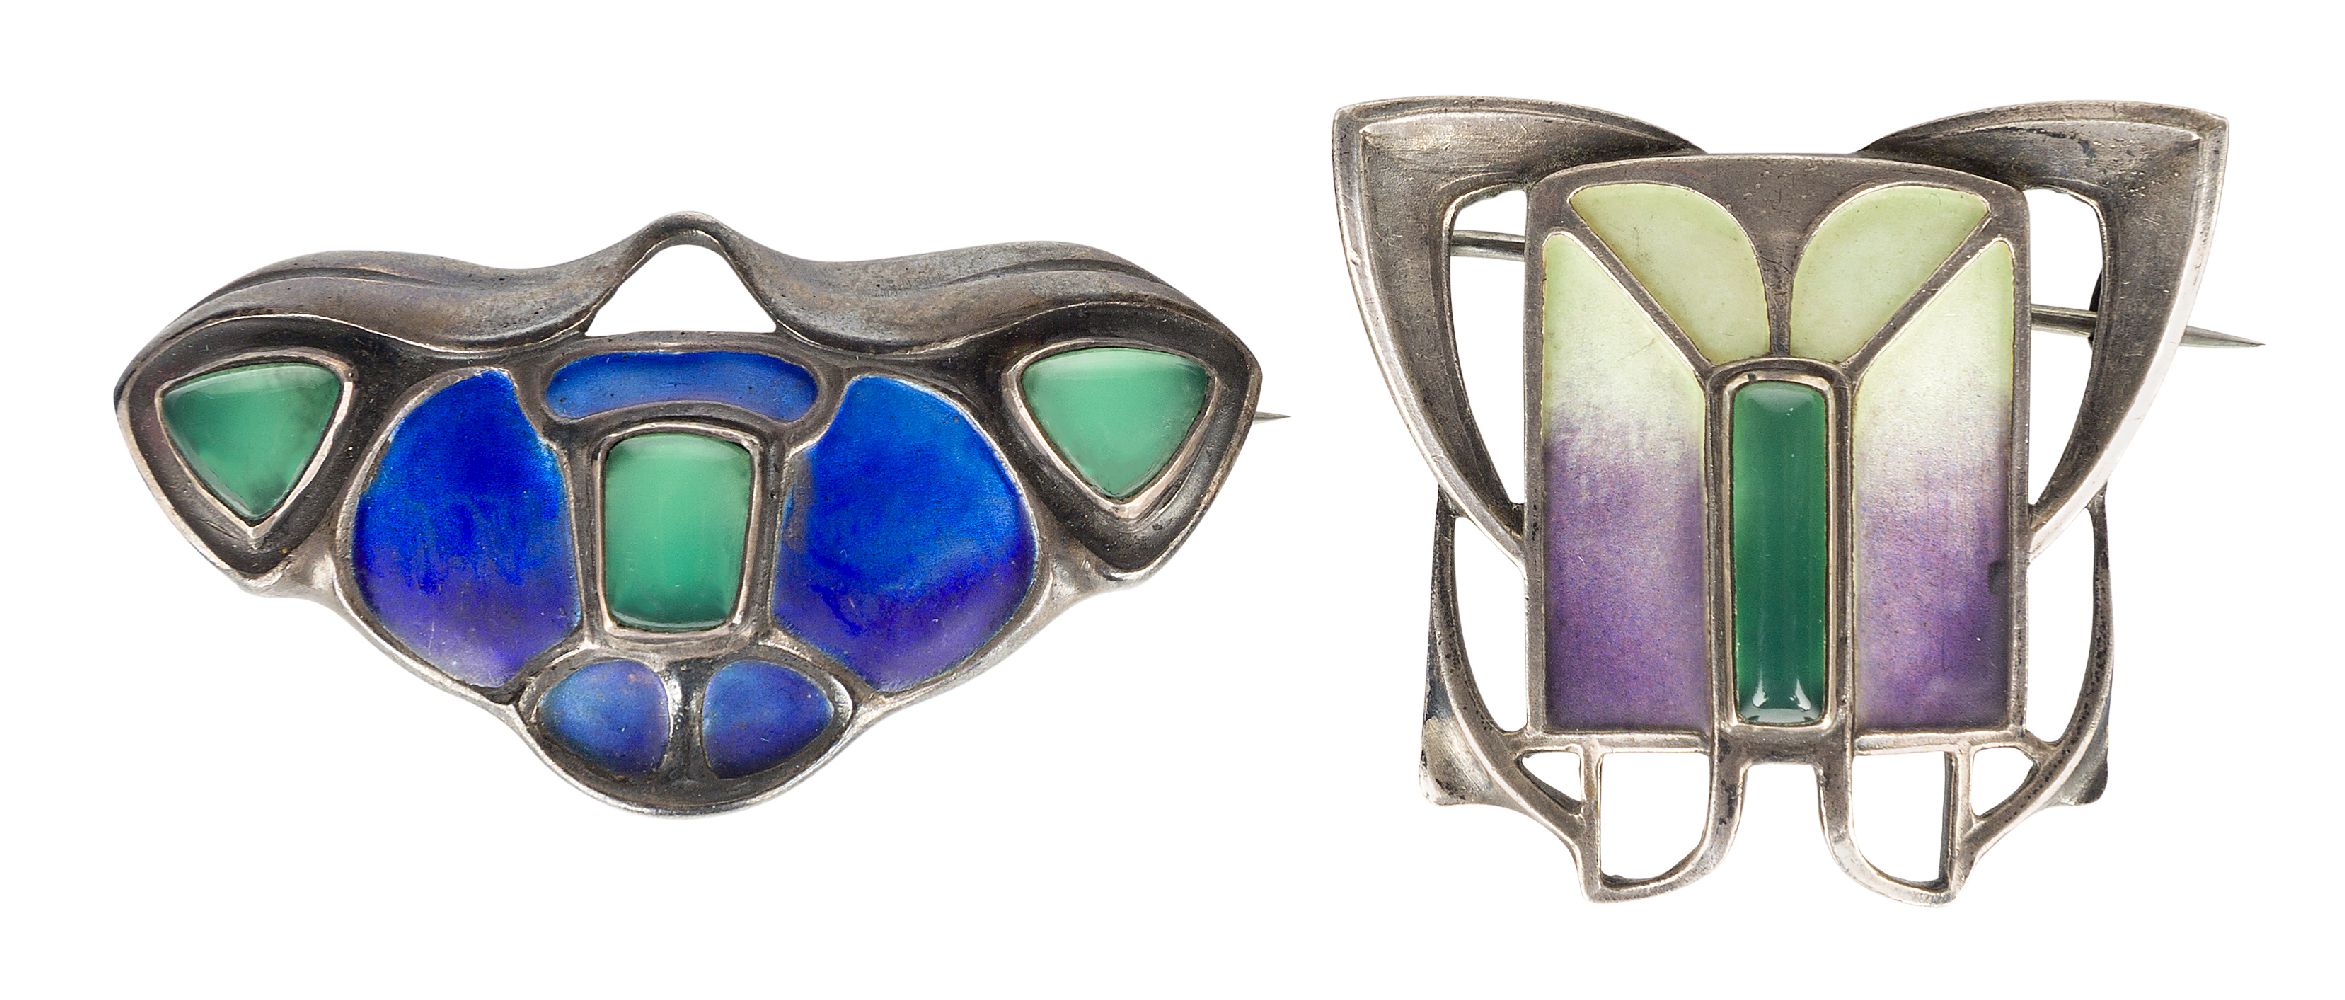 German, two Jugendstil silver, enamel and chrysoprase brooches probably made in Pforzheim c.1900,